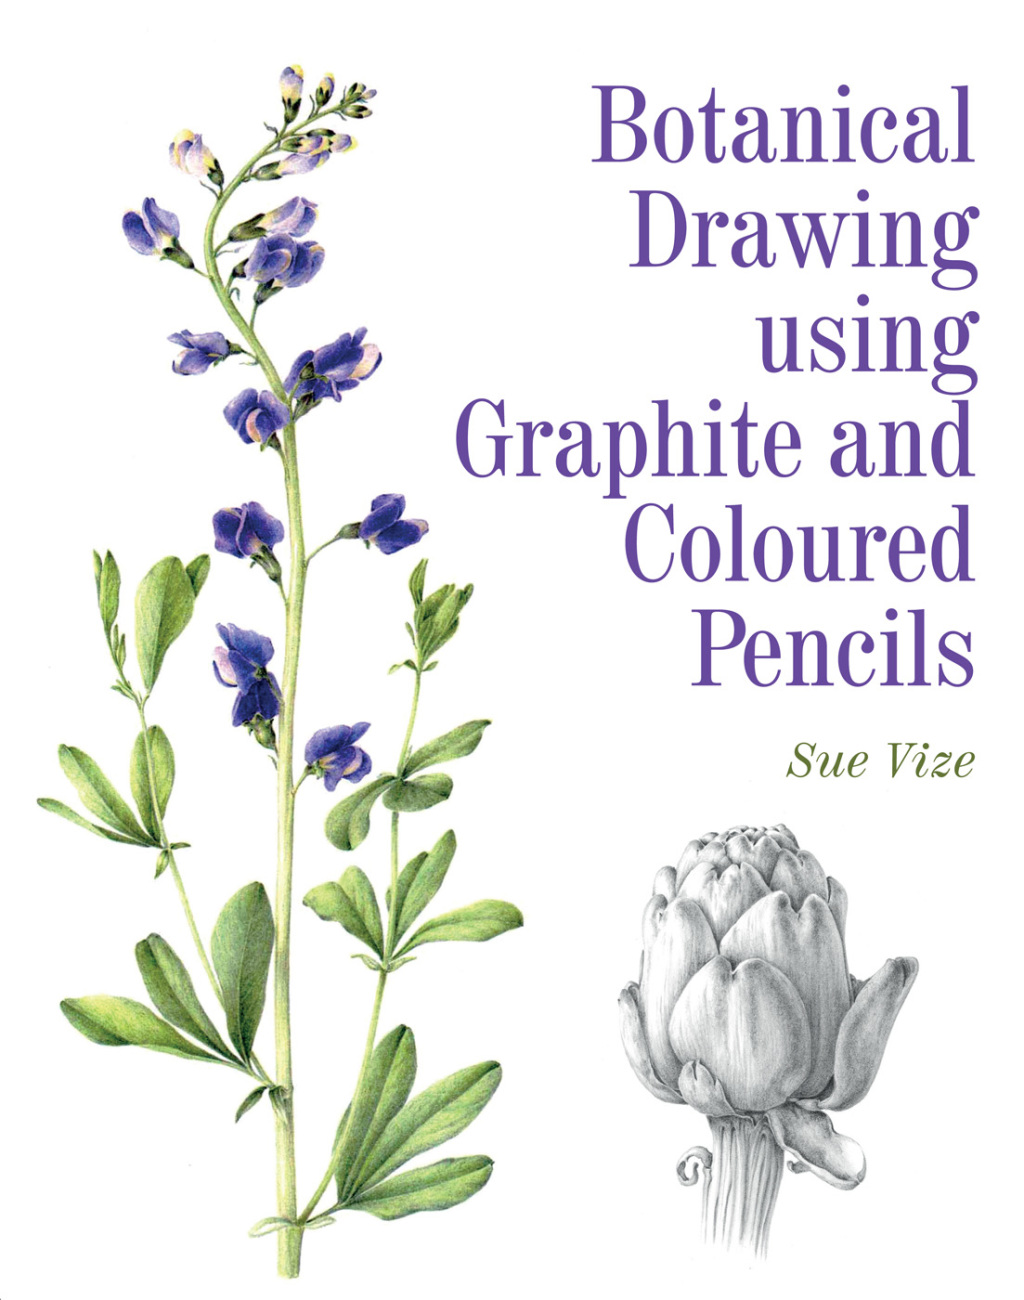 Reflowable Botanical Drawing using Graphite and Coloured Pencils